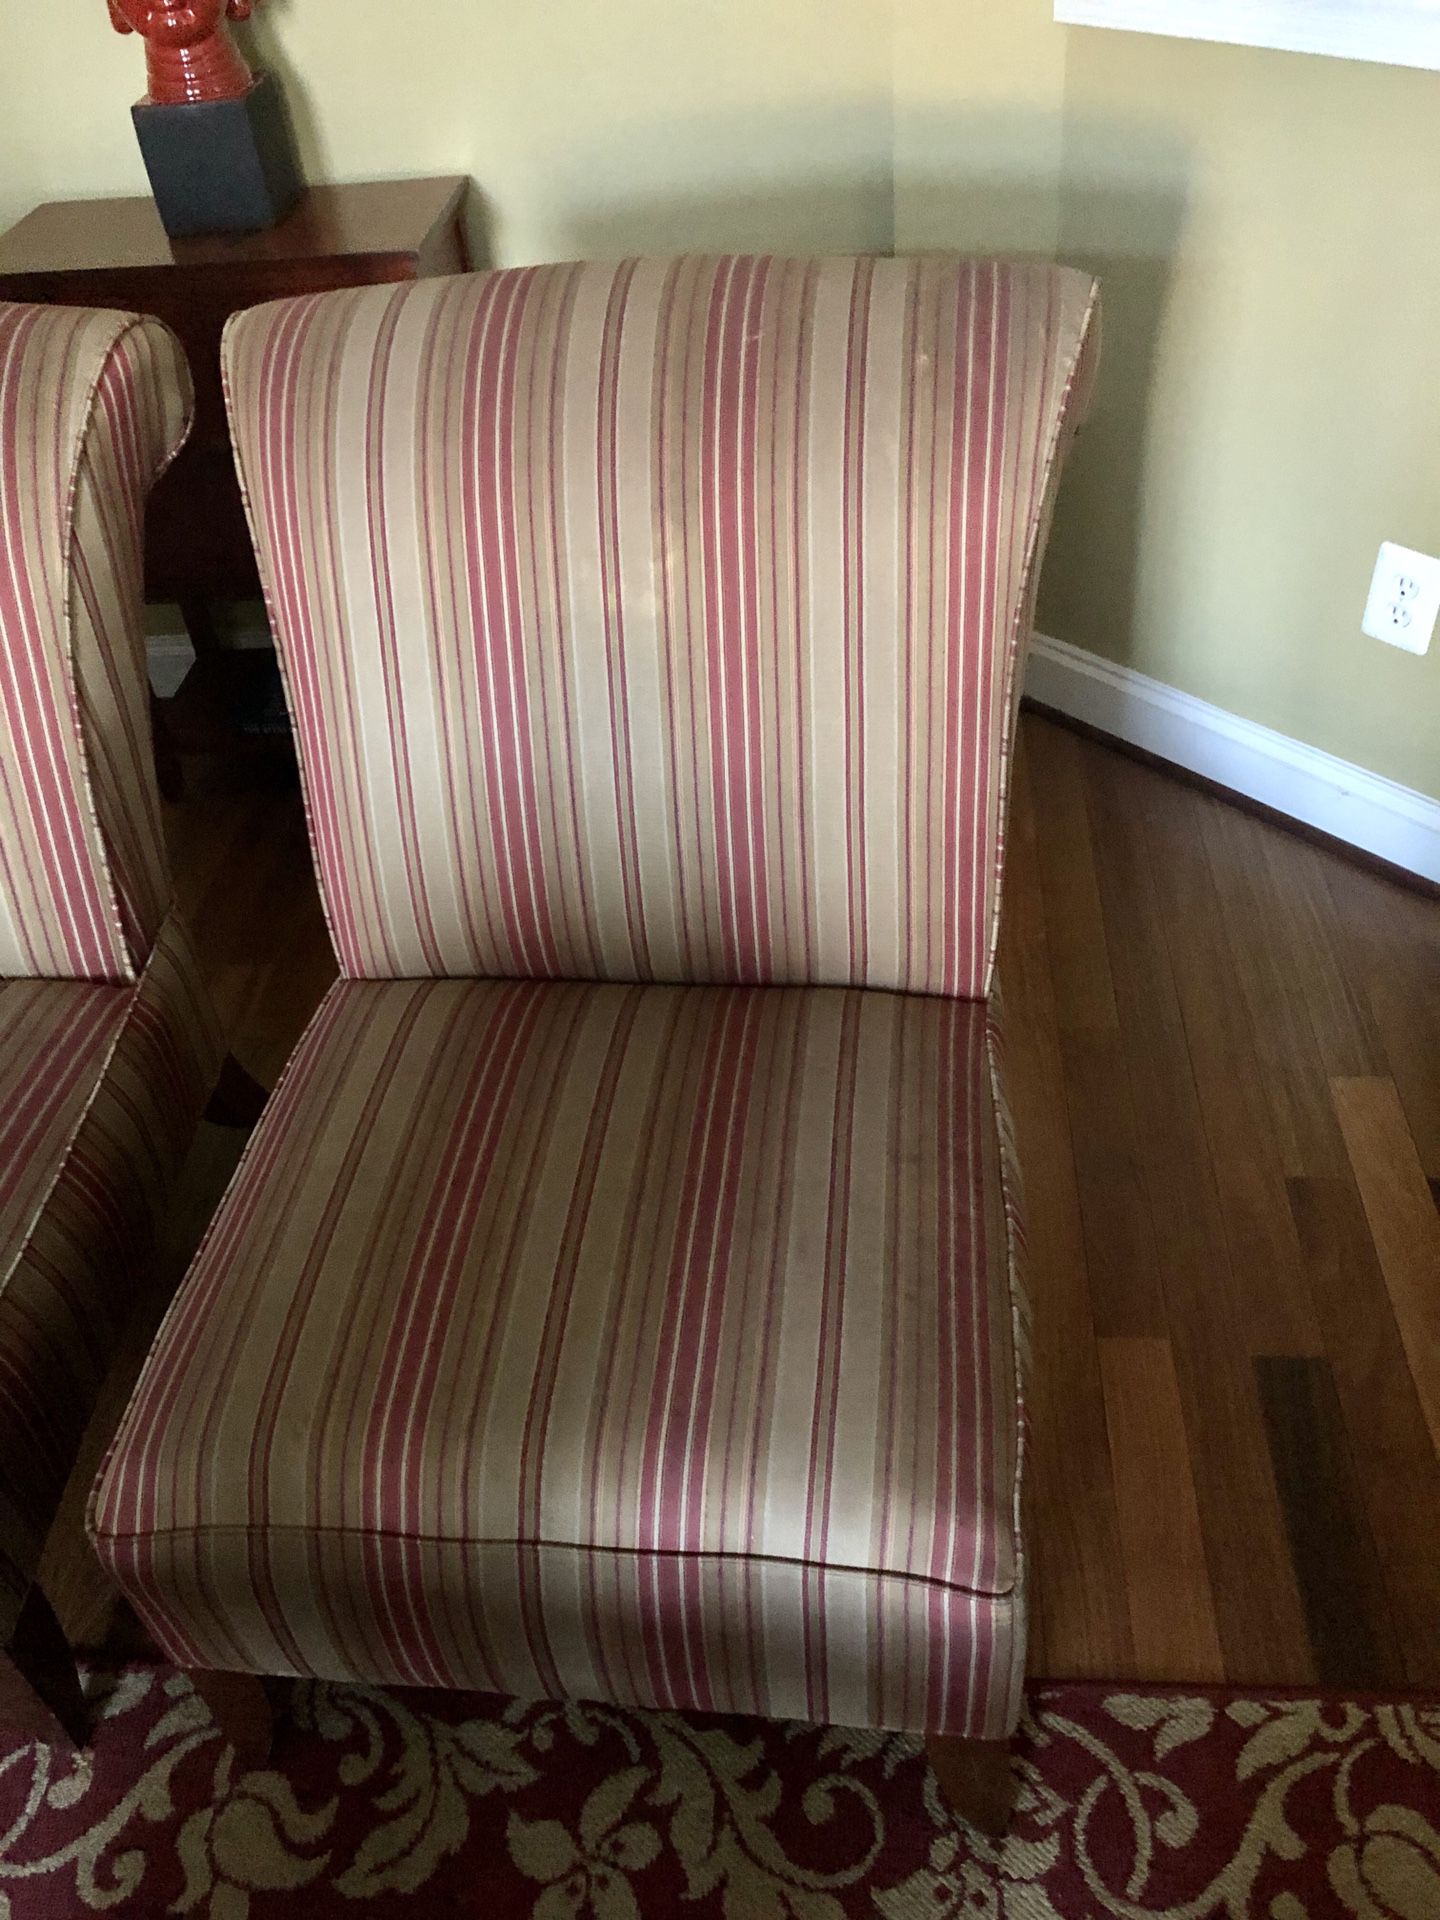 2 large accent chairs - FREE! Ready for pickup